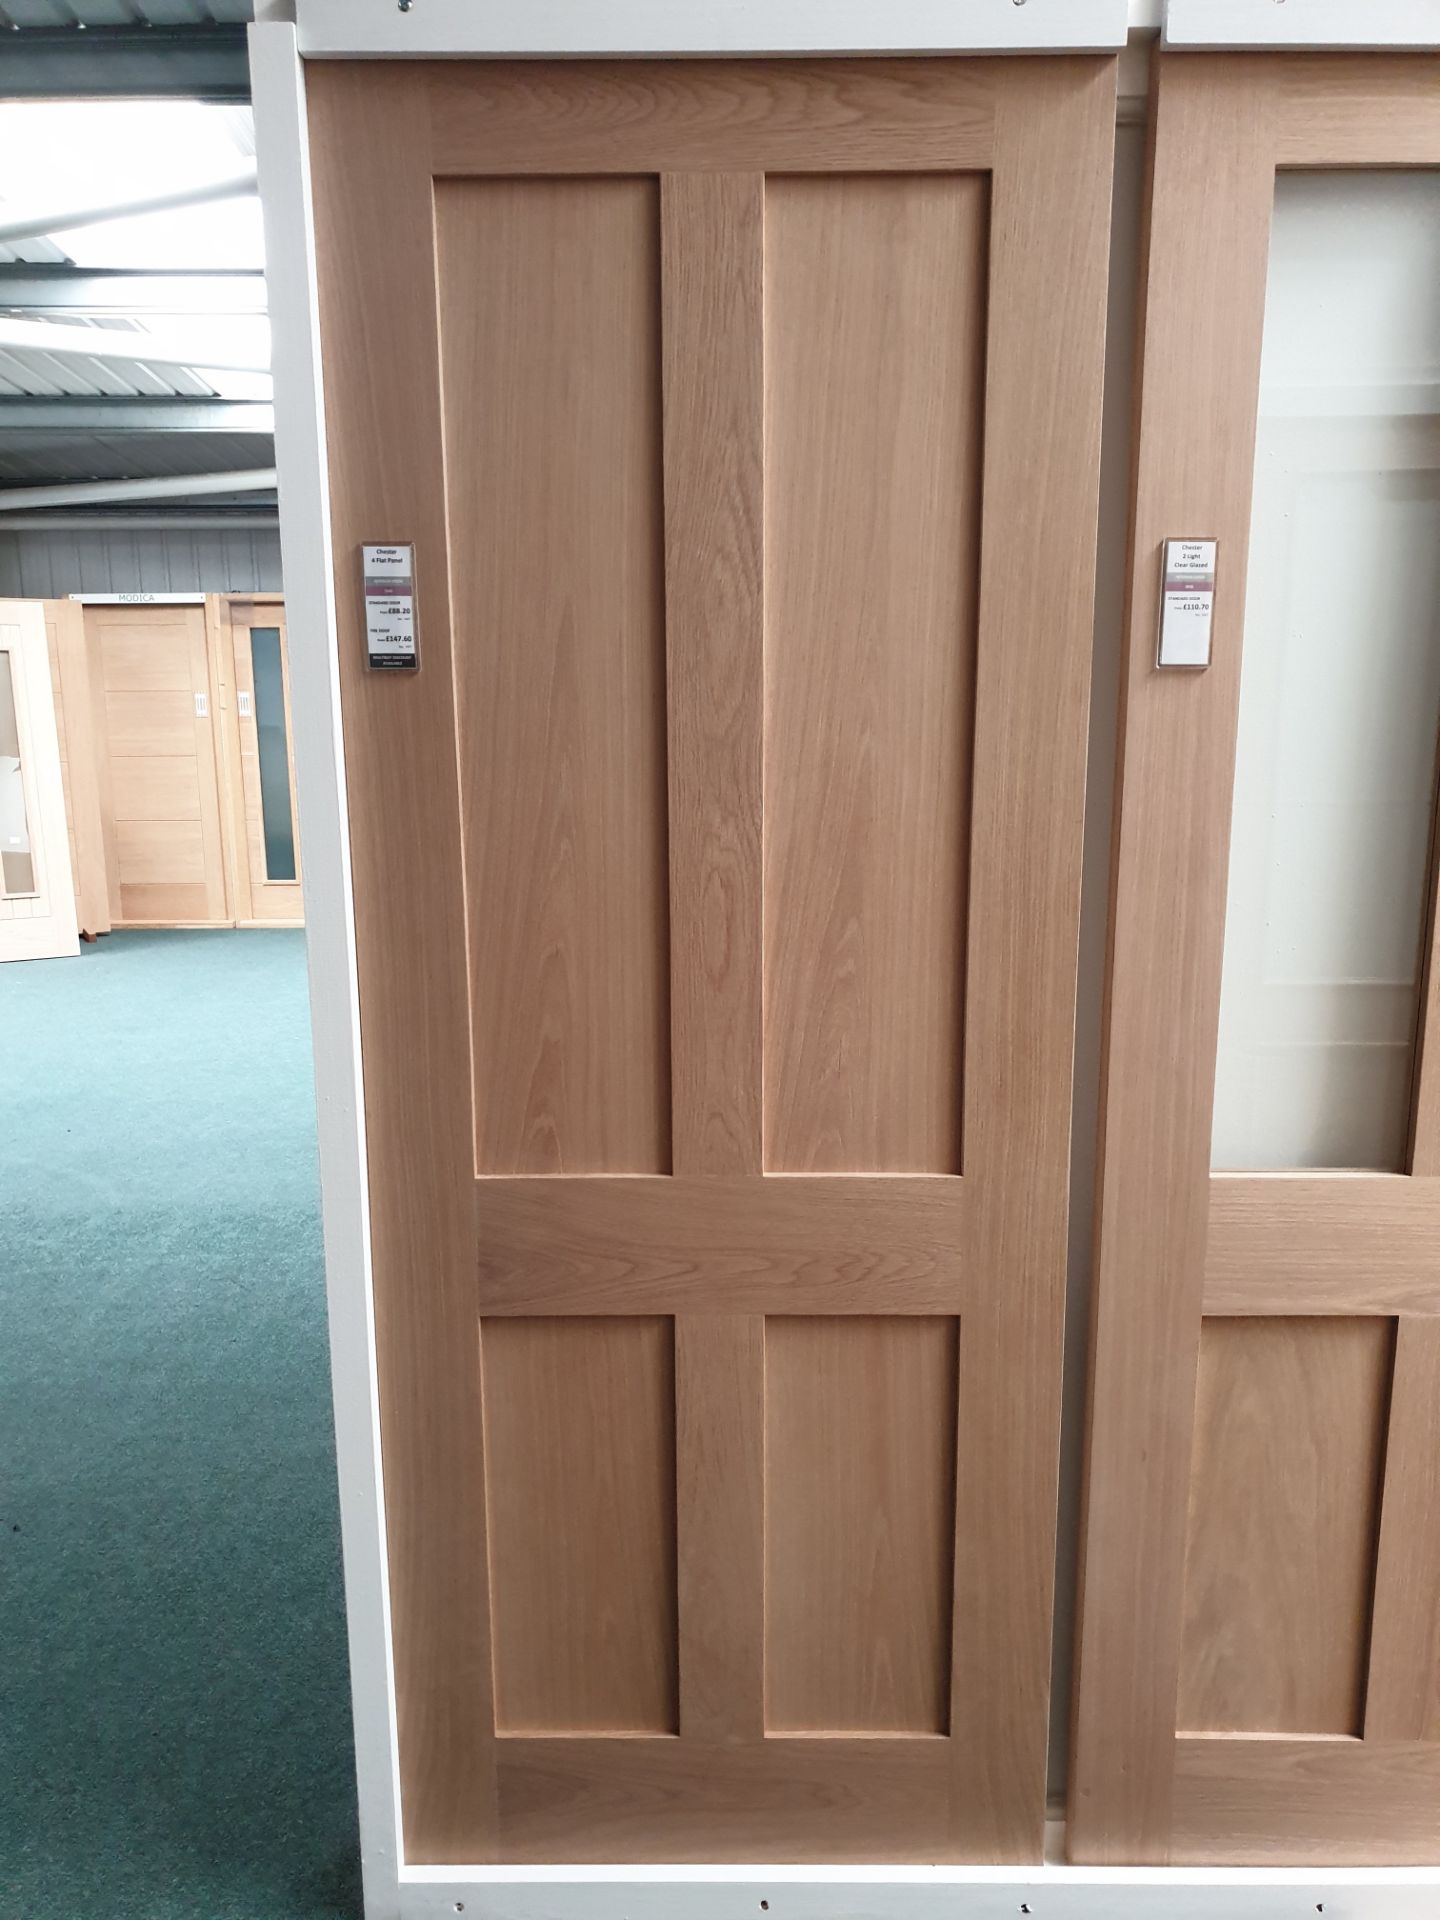 4 x Chester 4 Flat Panel Internal Fire Door CHE4P33FD 1981x838x44mm - Lots to be handed out in order